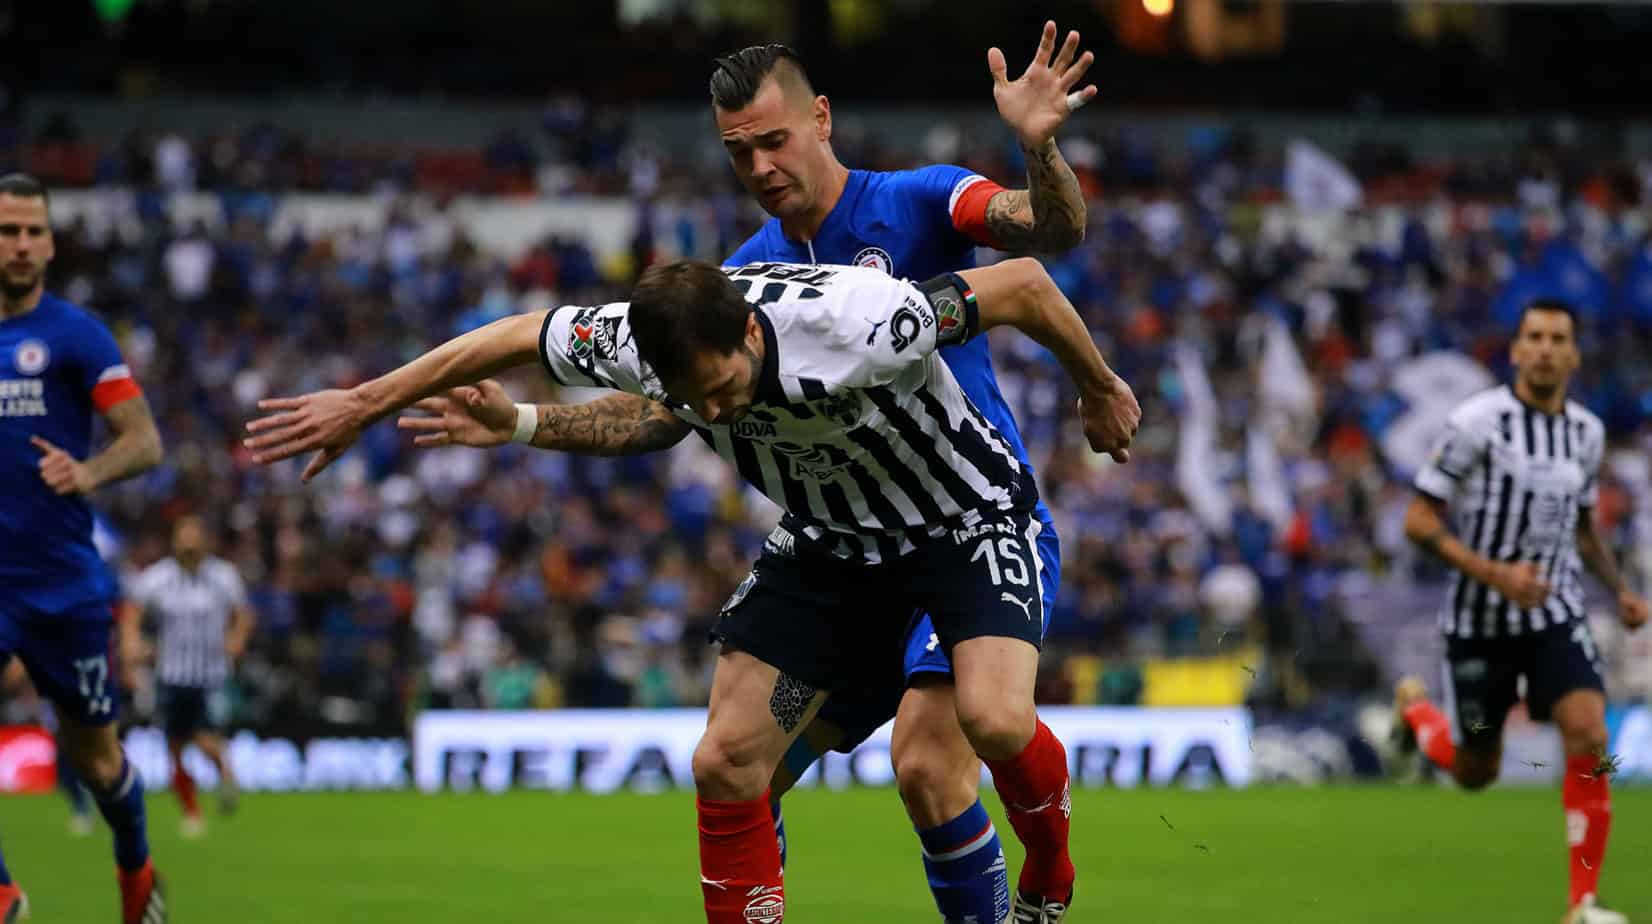 Liga MX Matchday 13 – Preview and Betting Odds